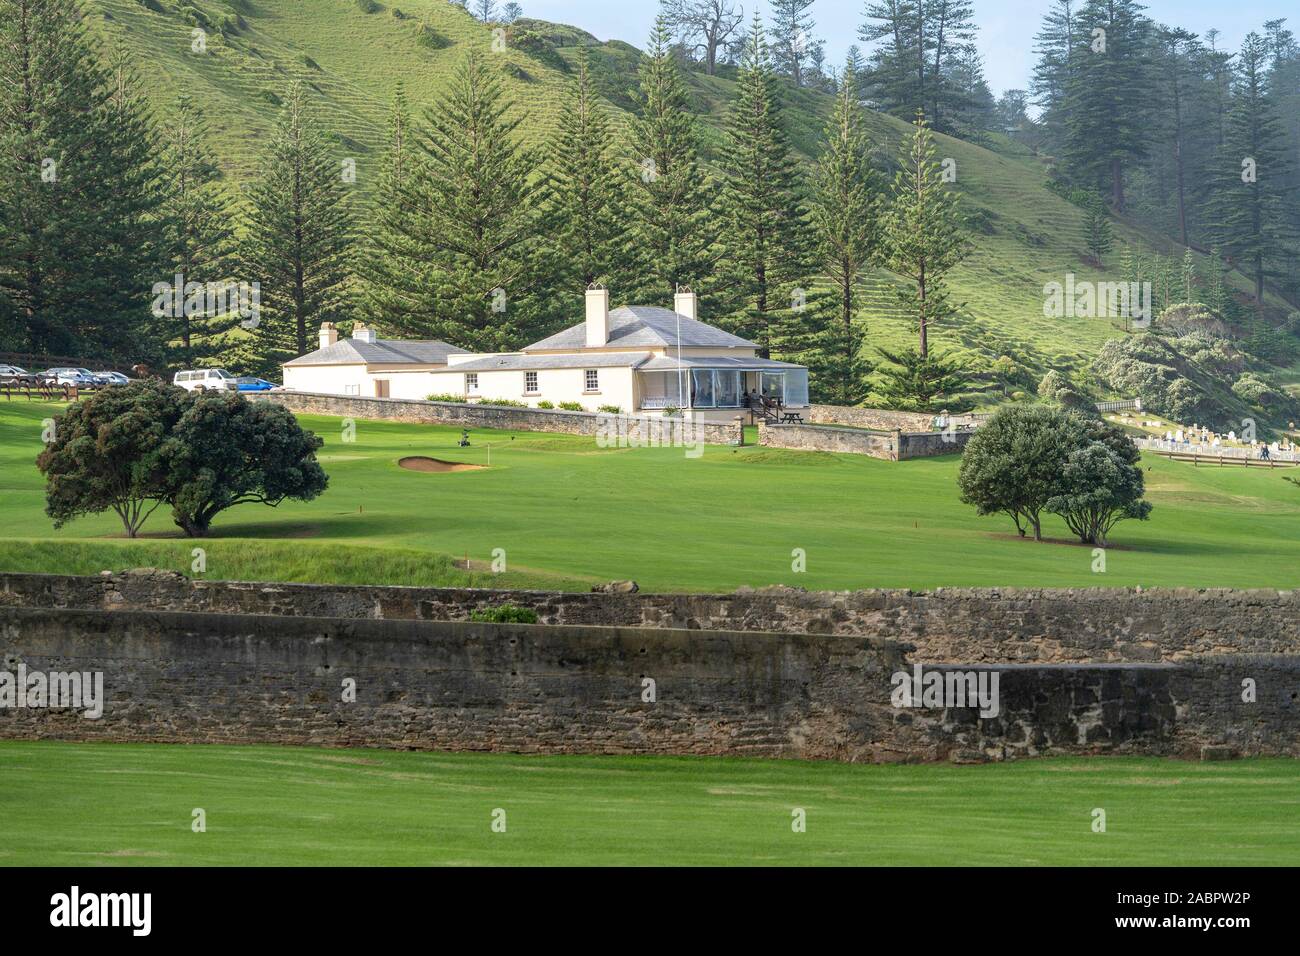 Norfolk Island Golf Club situated in Kingston and Arthur’s Vale Historic Area, built in 1843 to house the Stipendiary Magistrate. Norfolk Island, Sout Stock Photo